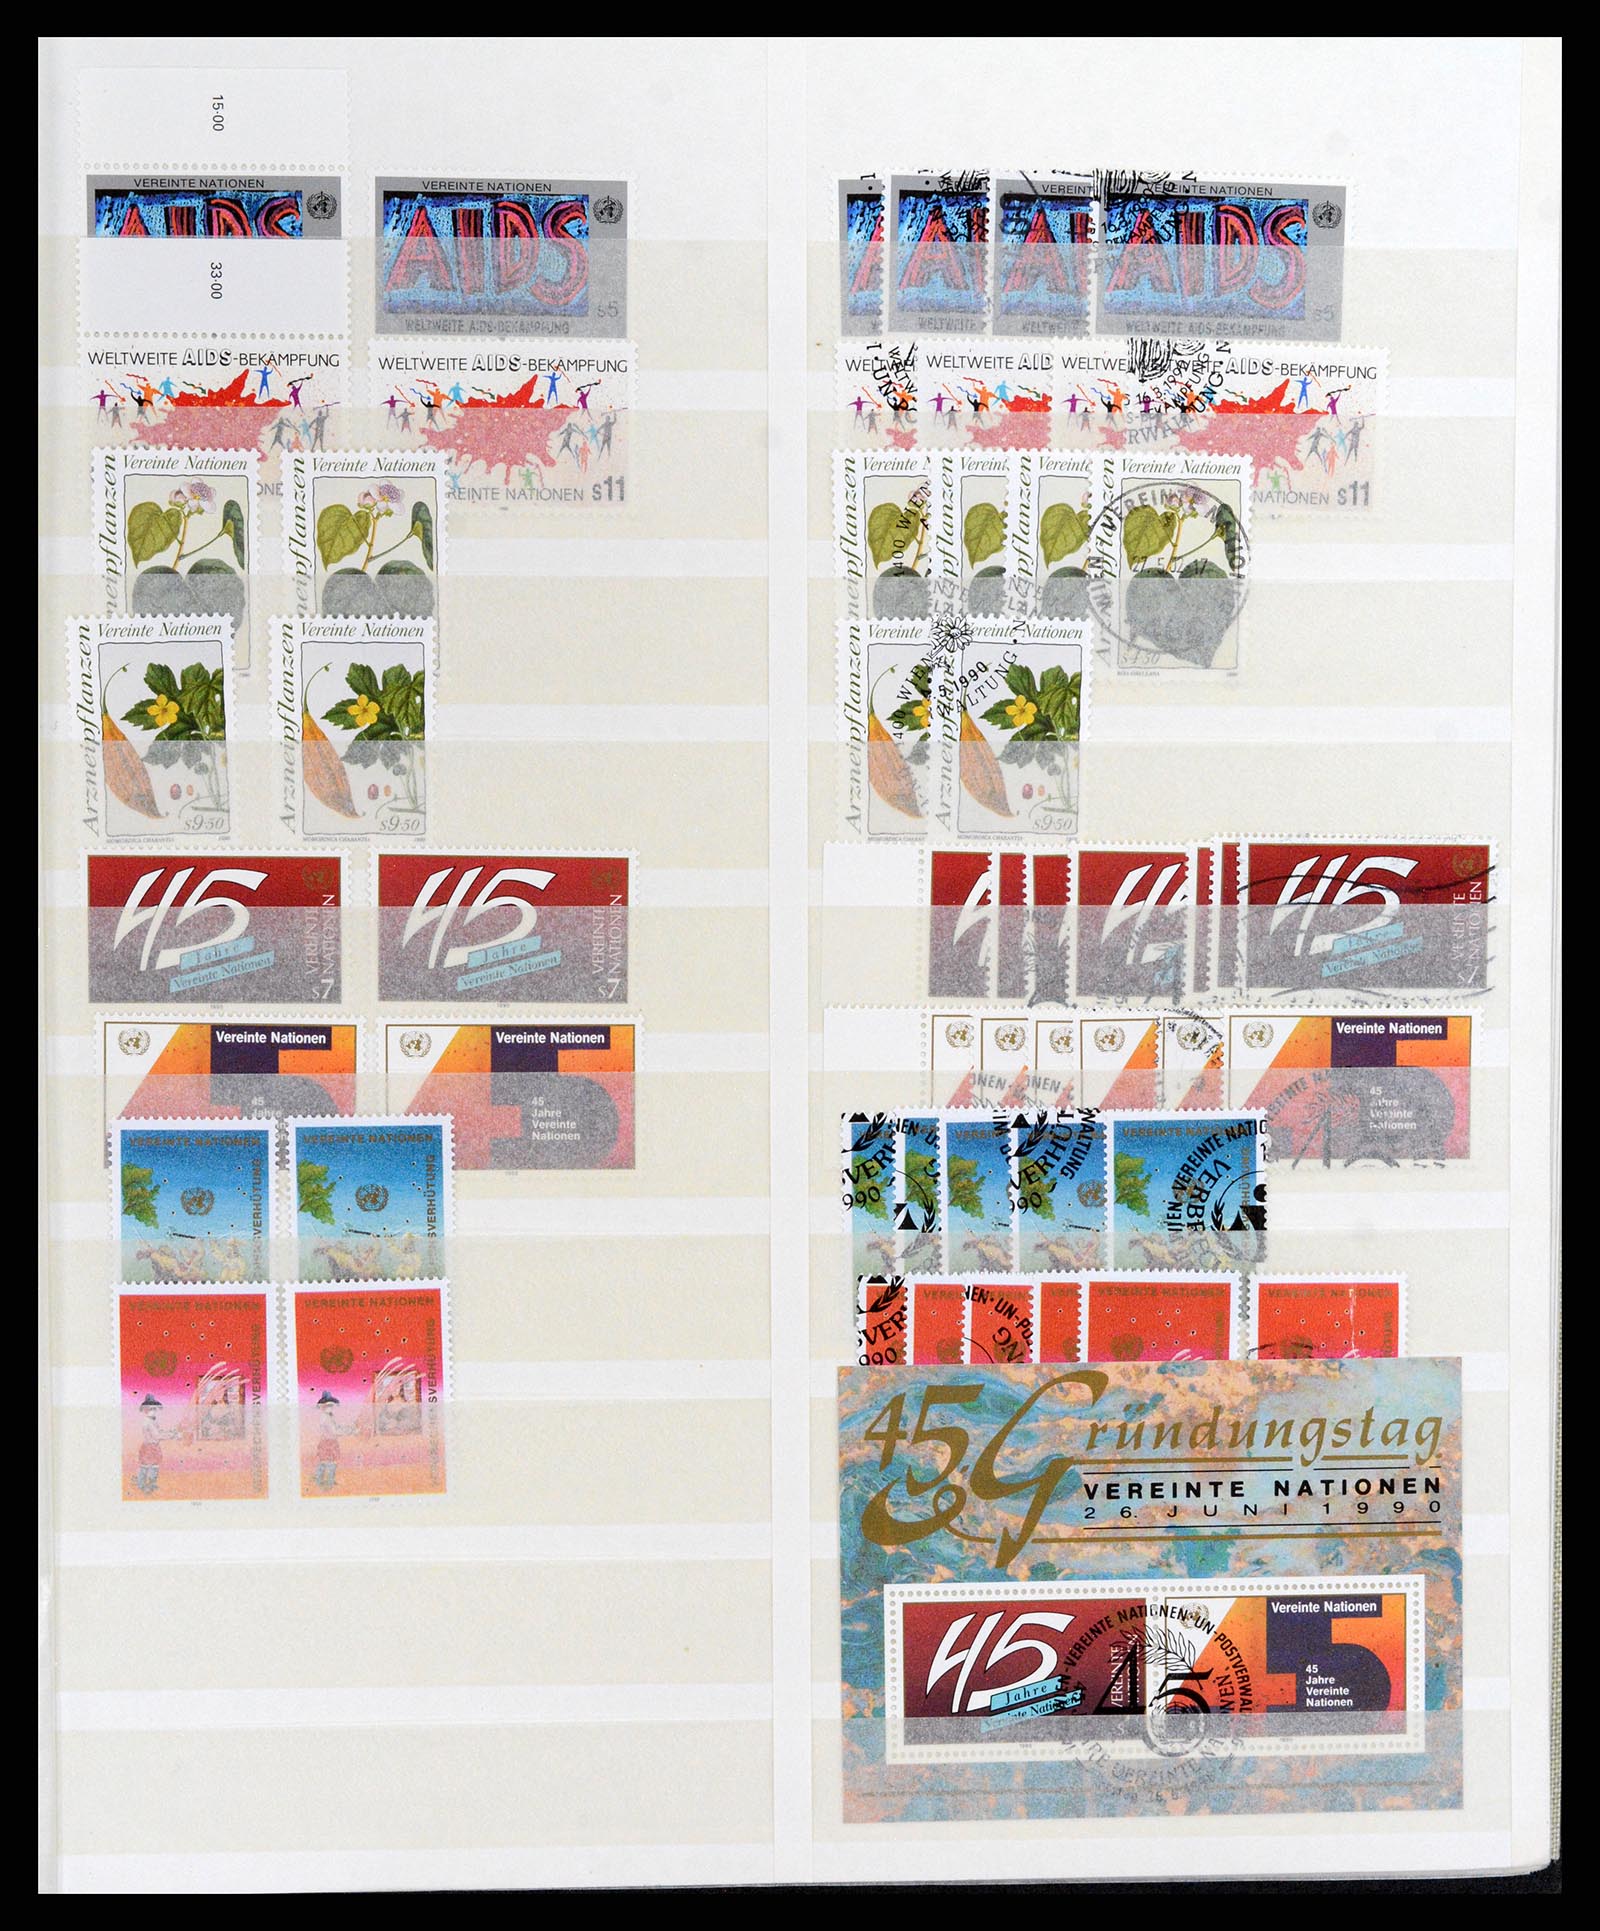 37648 011 - Stamp collection 37648 United Nations Vienna 1981-2016.